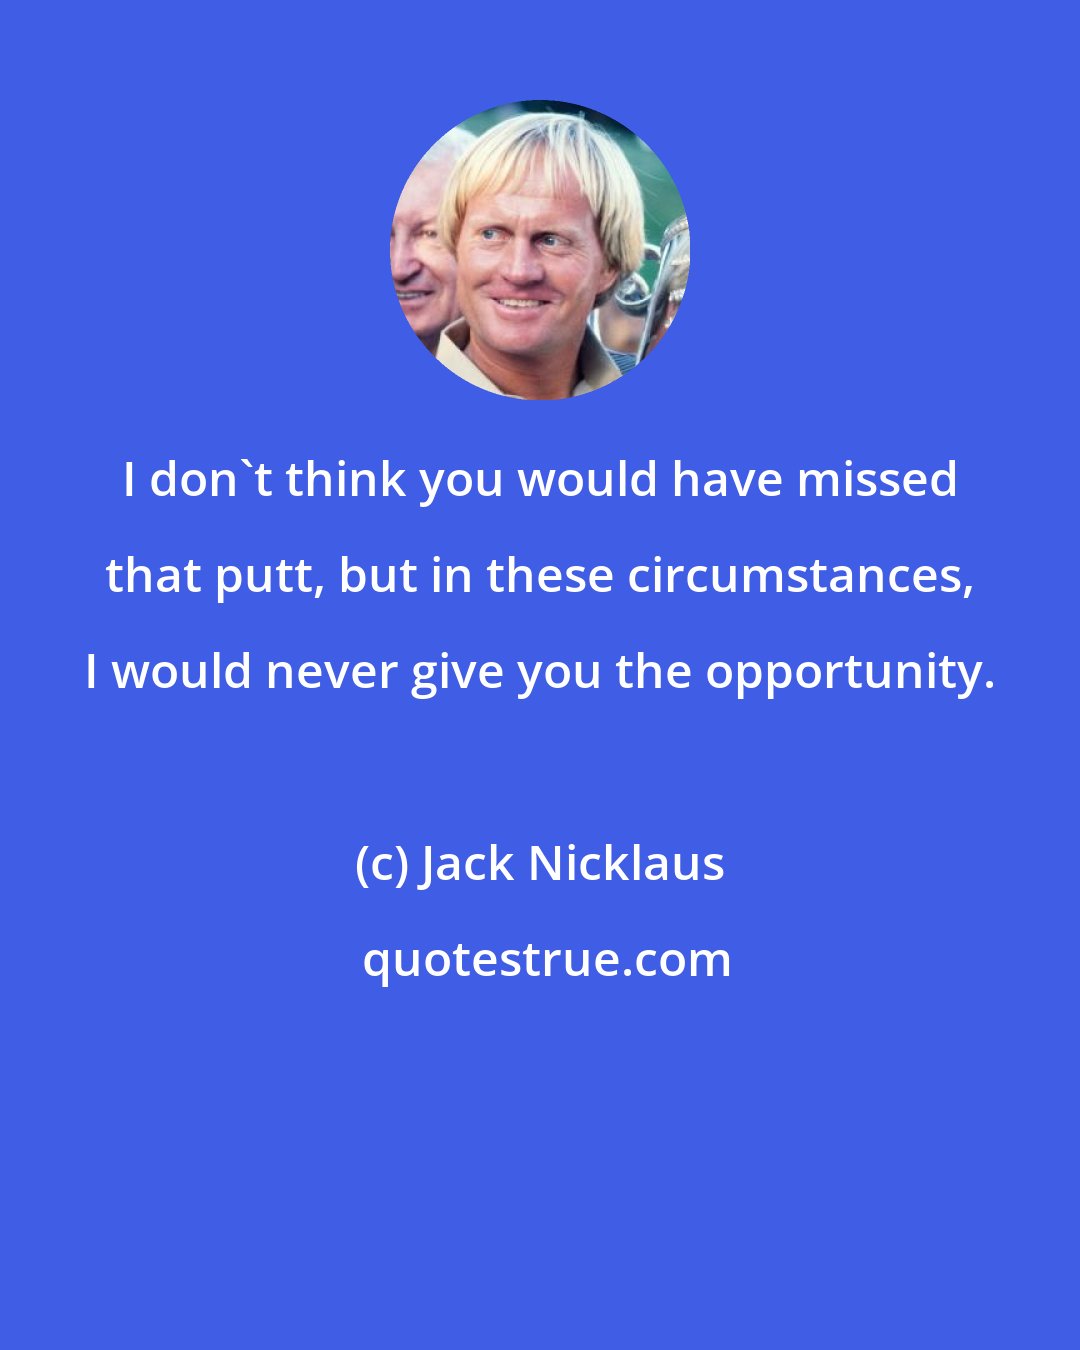 Jack Nicklaus: I don't think you would have missed that putt, but in these circumstances, I would never give you the opportunity.